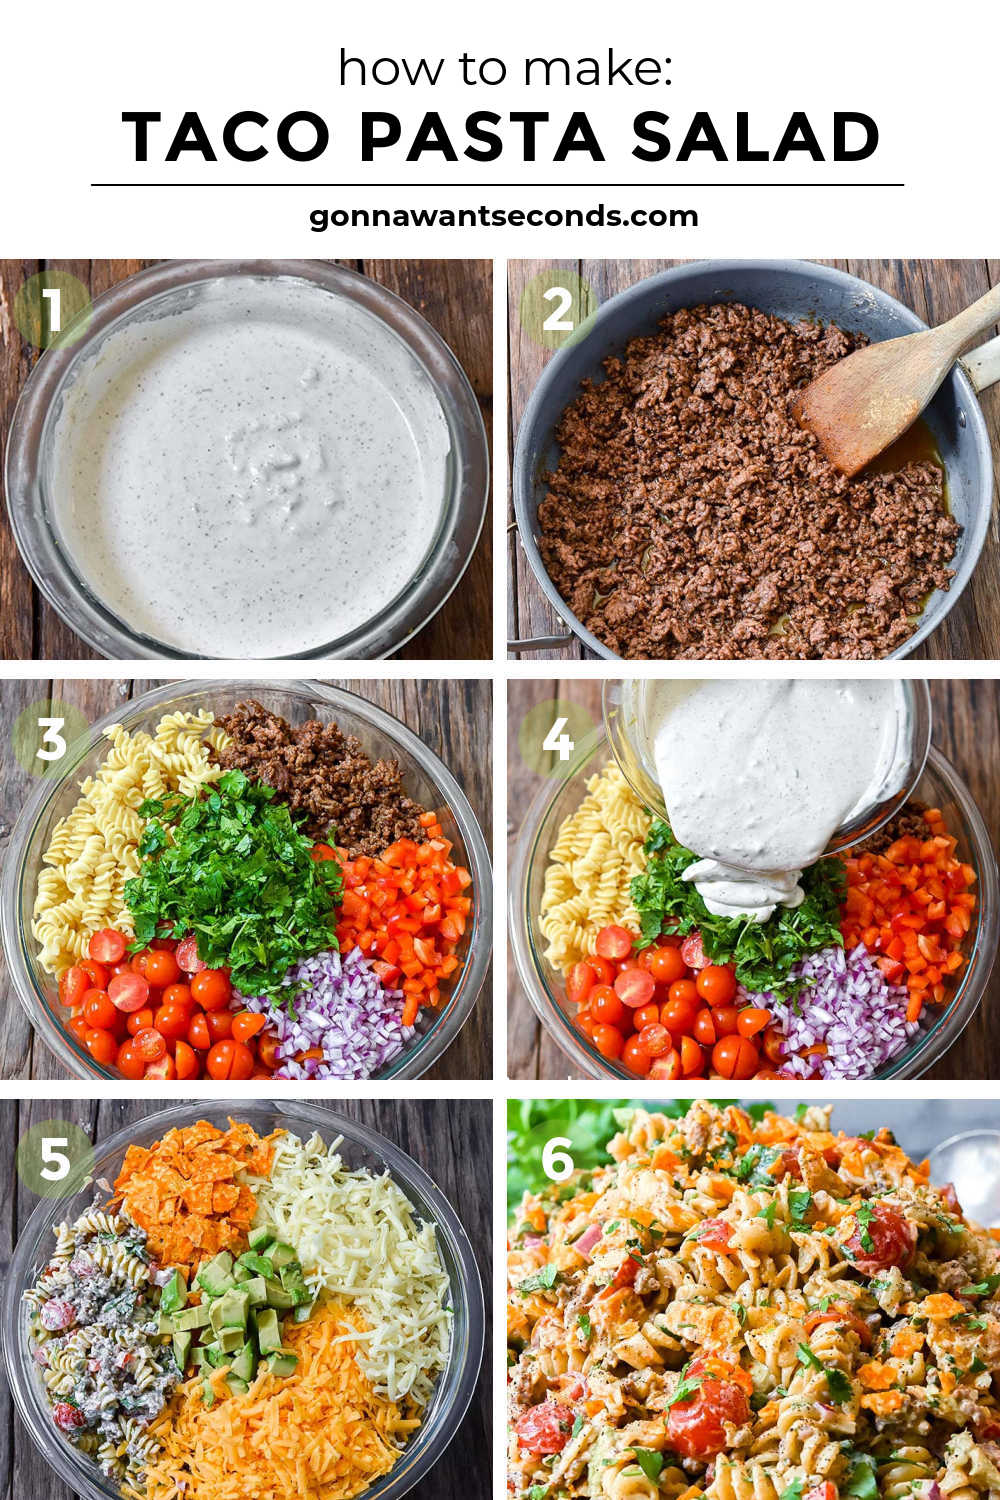 Step by step how to make taco pasta salad